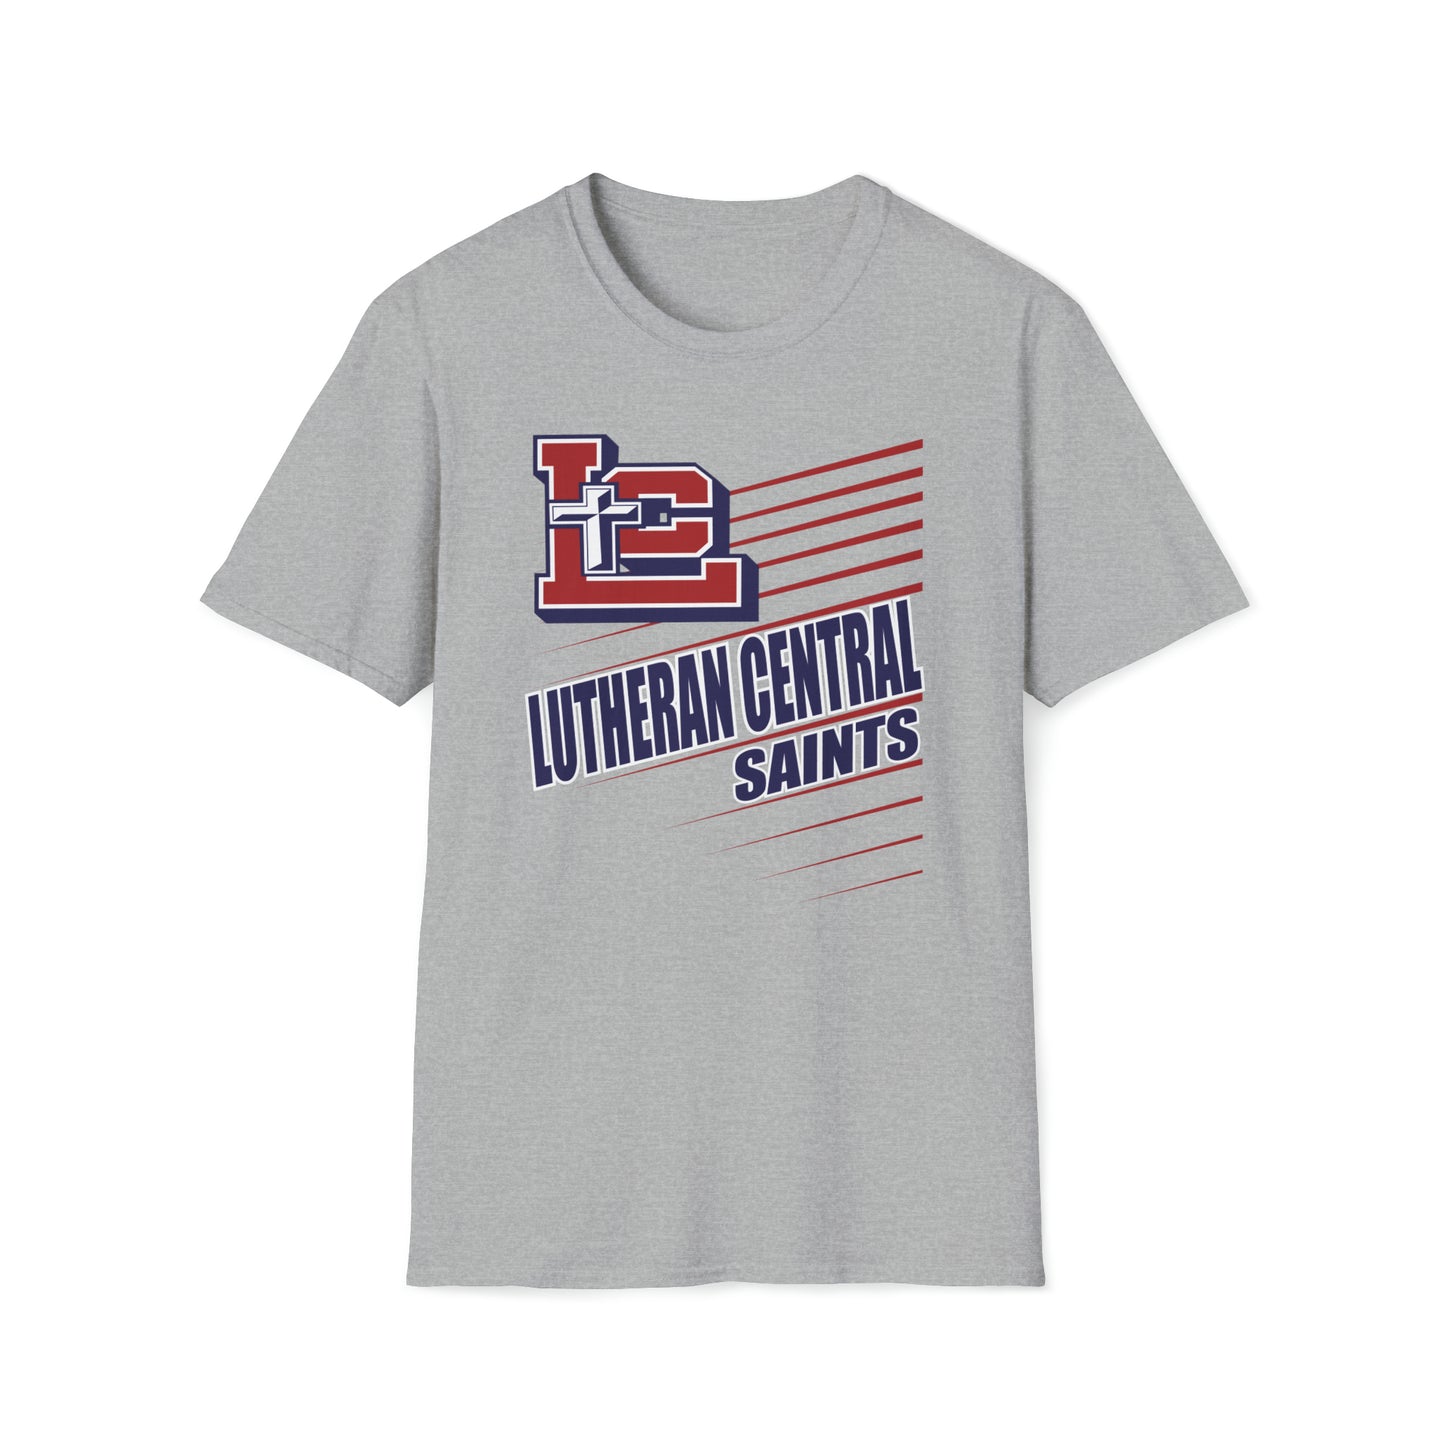 Lutheran Central Saints Unisex Softstyle T-Shirt